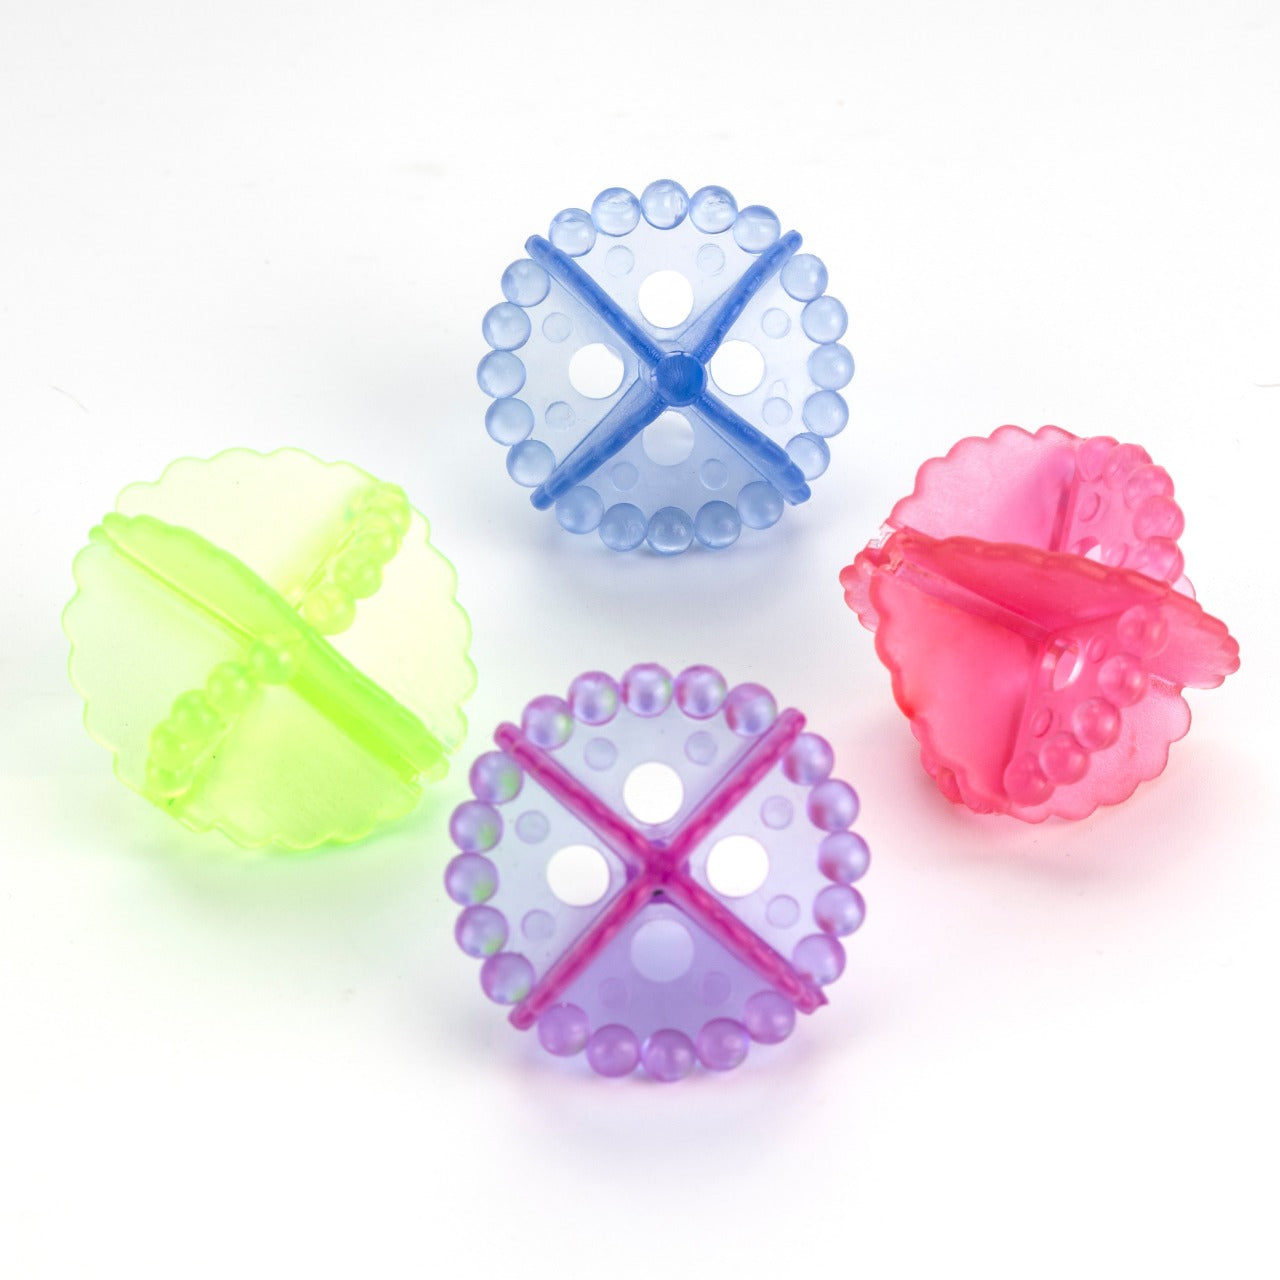 205 Laundry Washing Ball, Wash Without Detergent (4pcs) JK Trends